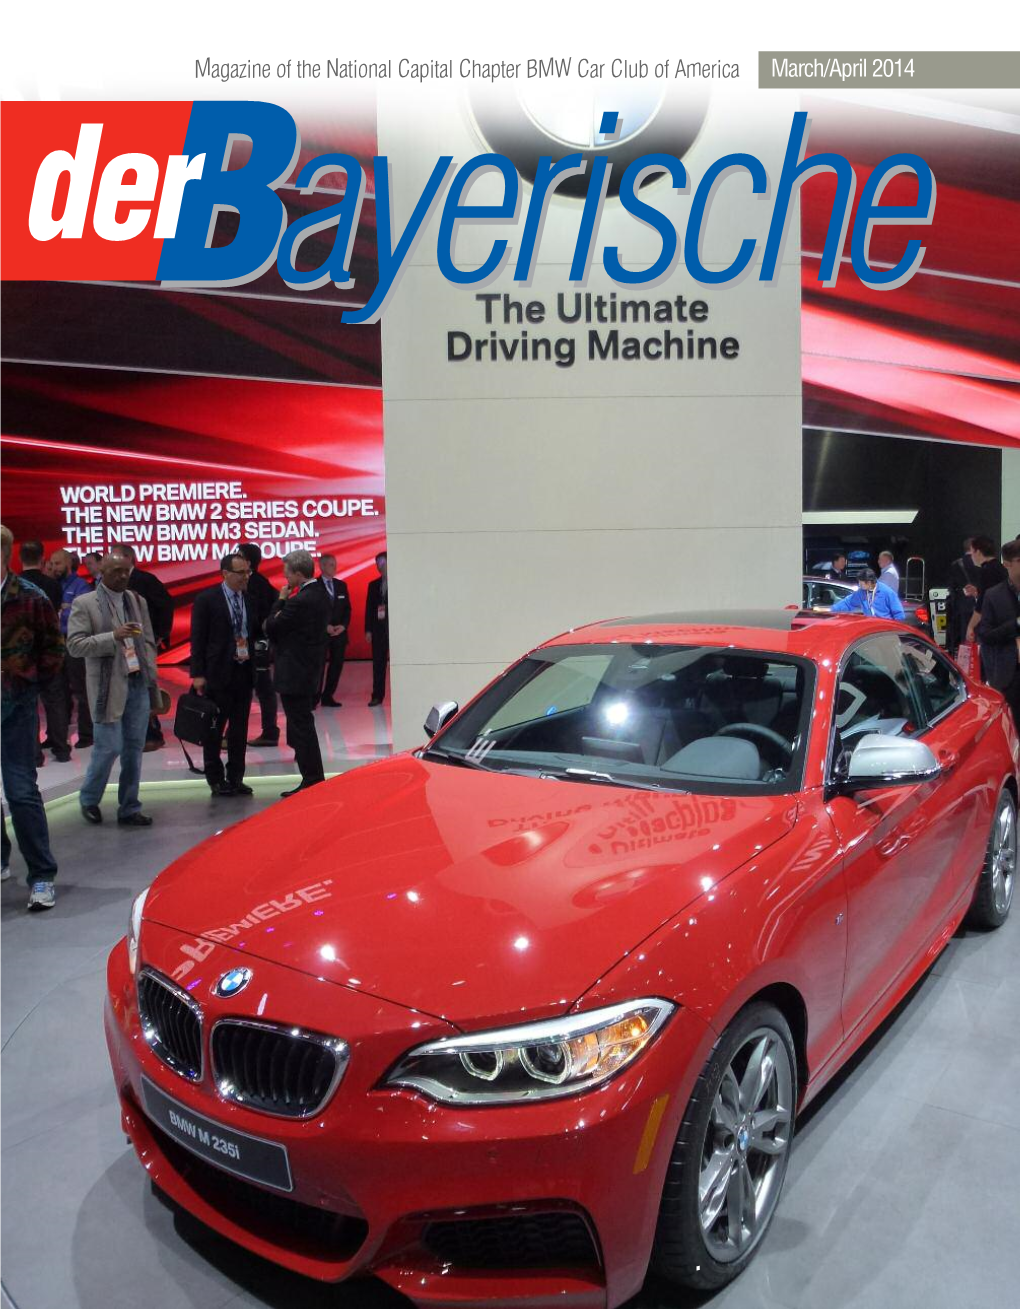 Magazine of the National Capital Chapter BMW Car Club of America March/April 2014